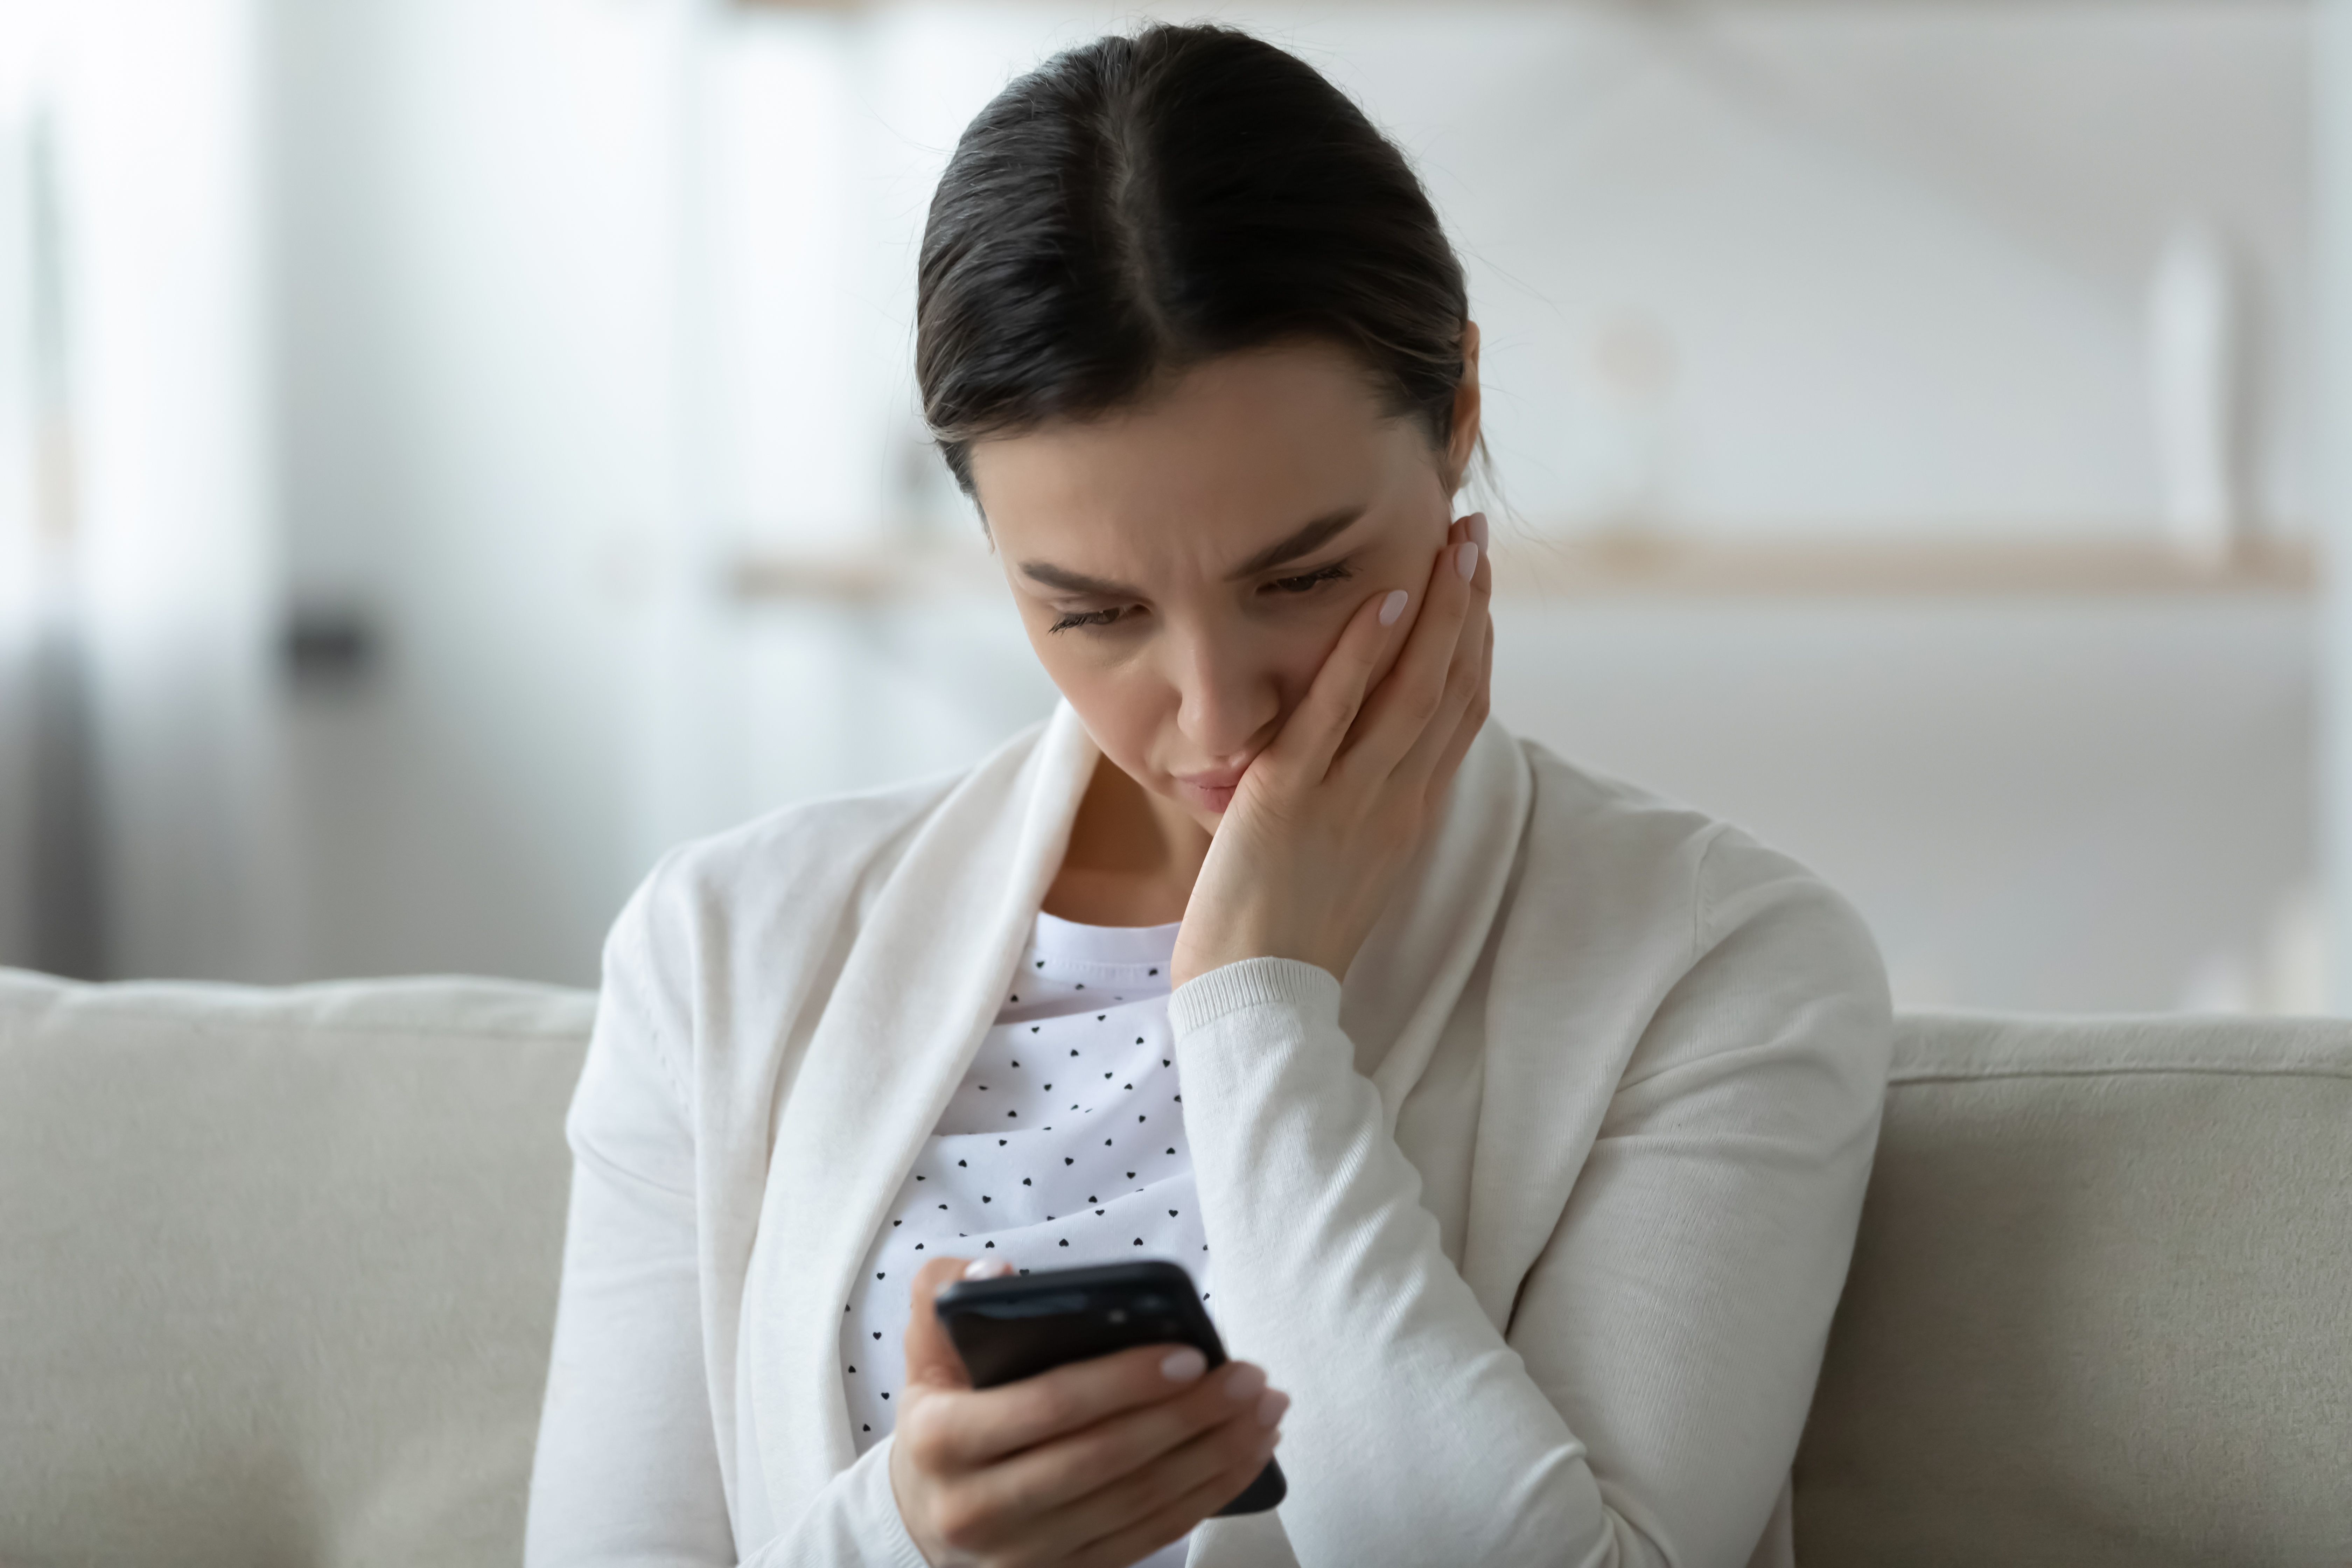 A distressed woman staring at her phone screen | Source: Shutterstock